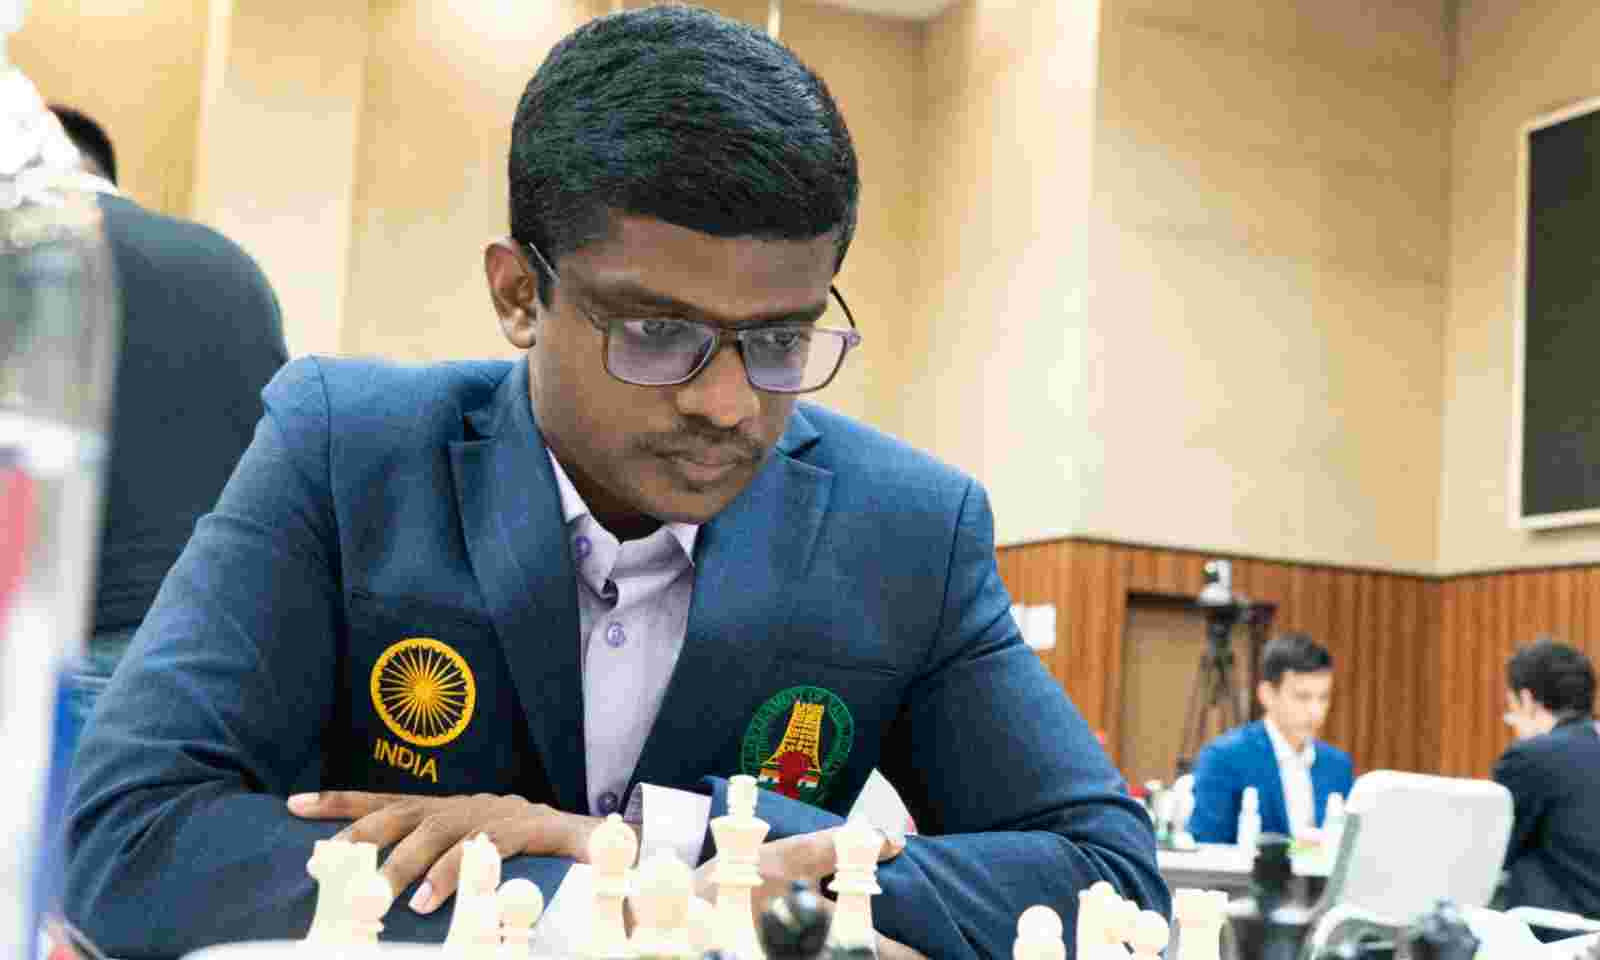 GM SL Narayanan wins bronze, finishes Qatar Masters with best rating  performance